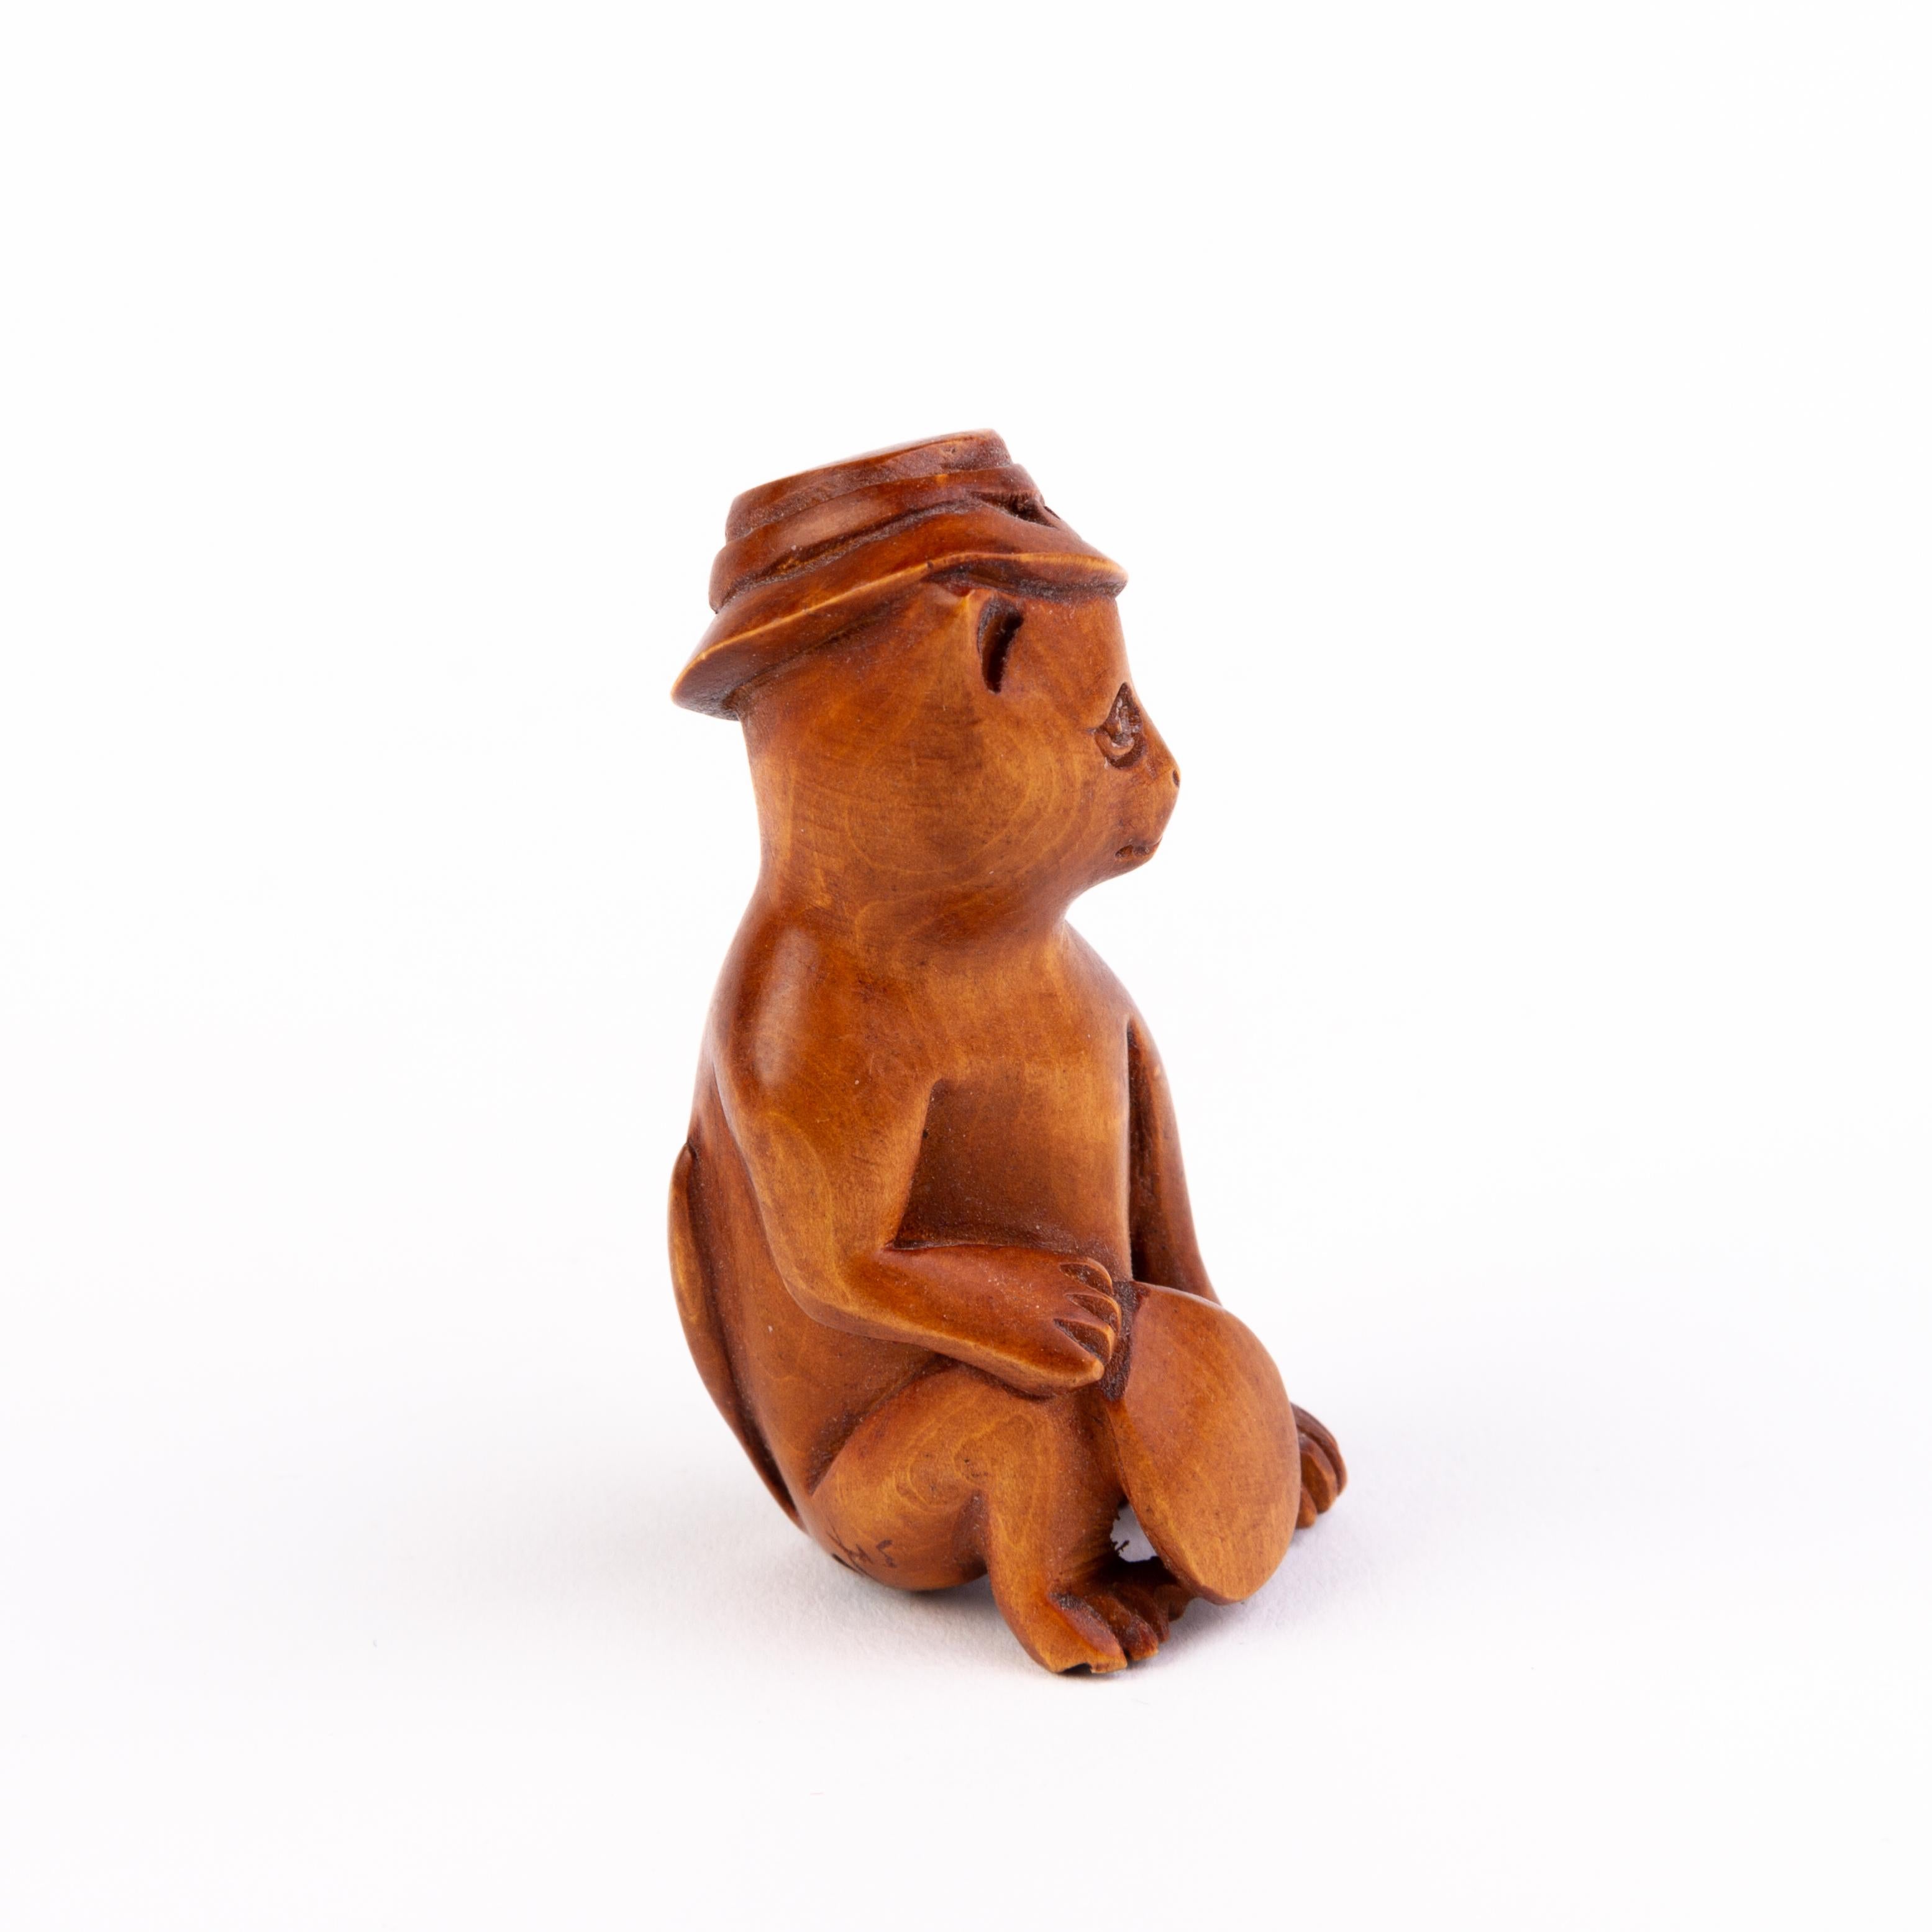 In good condition
From a private collection
Free international shipping
Signed Japanese Carved Boxwood Netsuke of a Cat with Hat